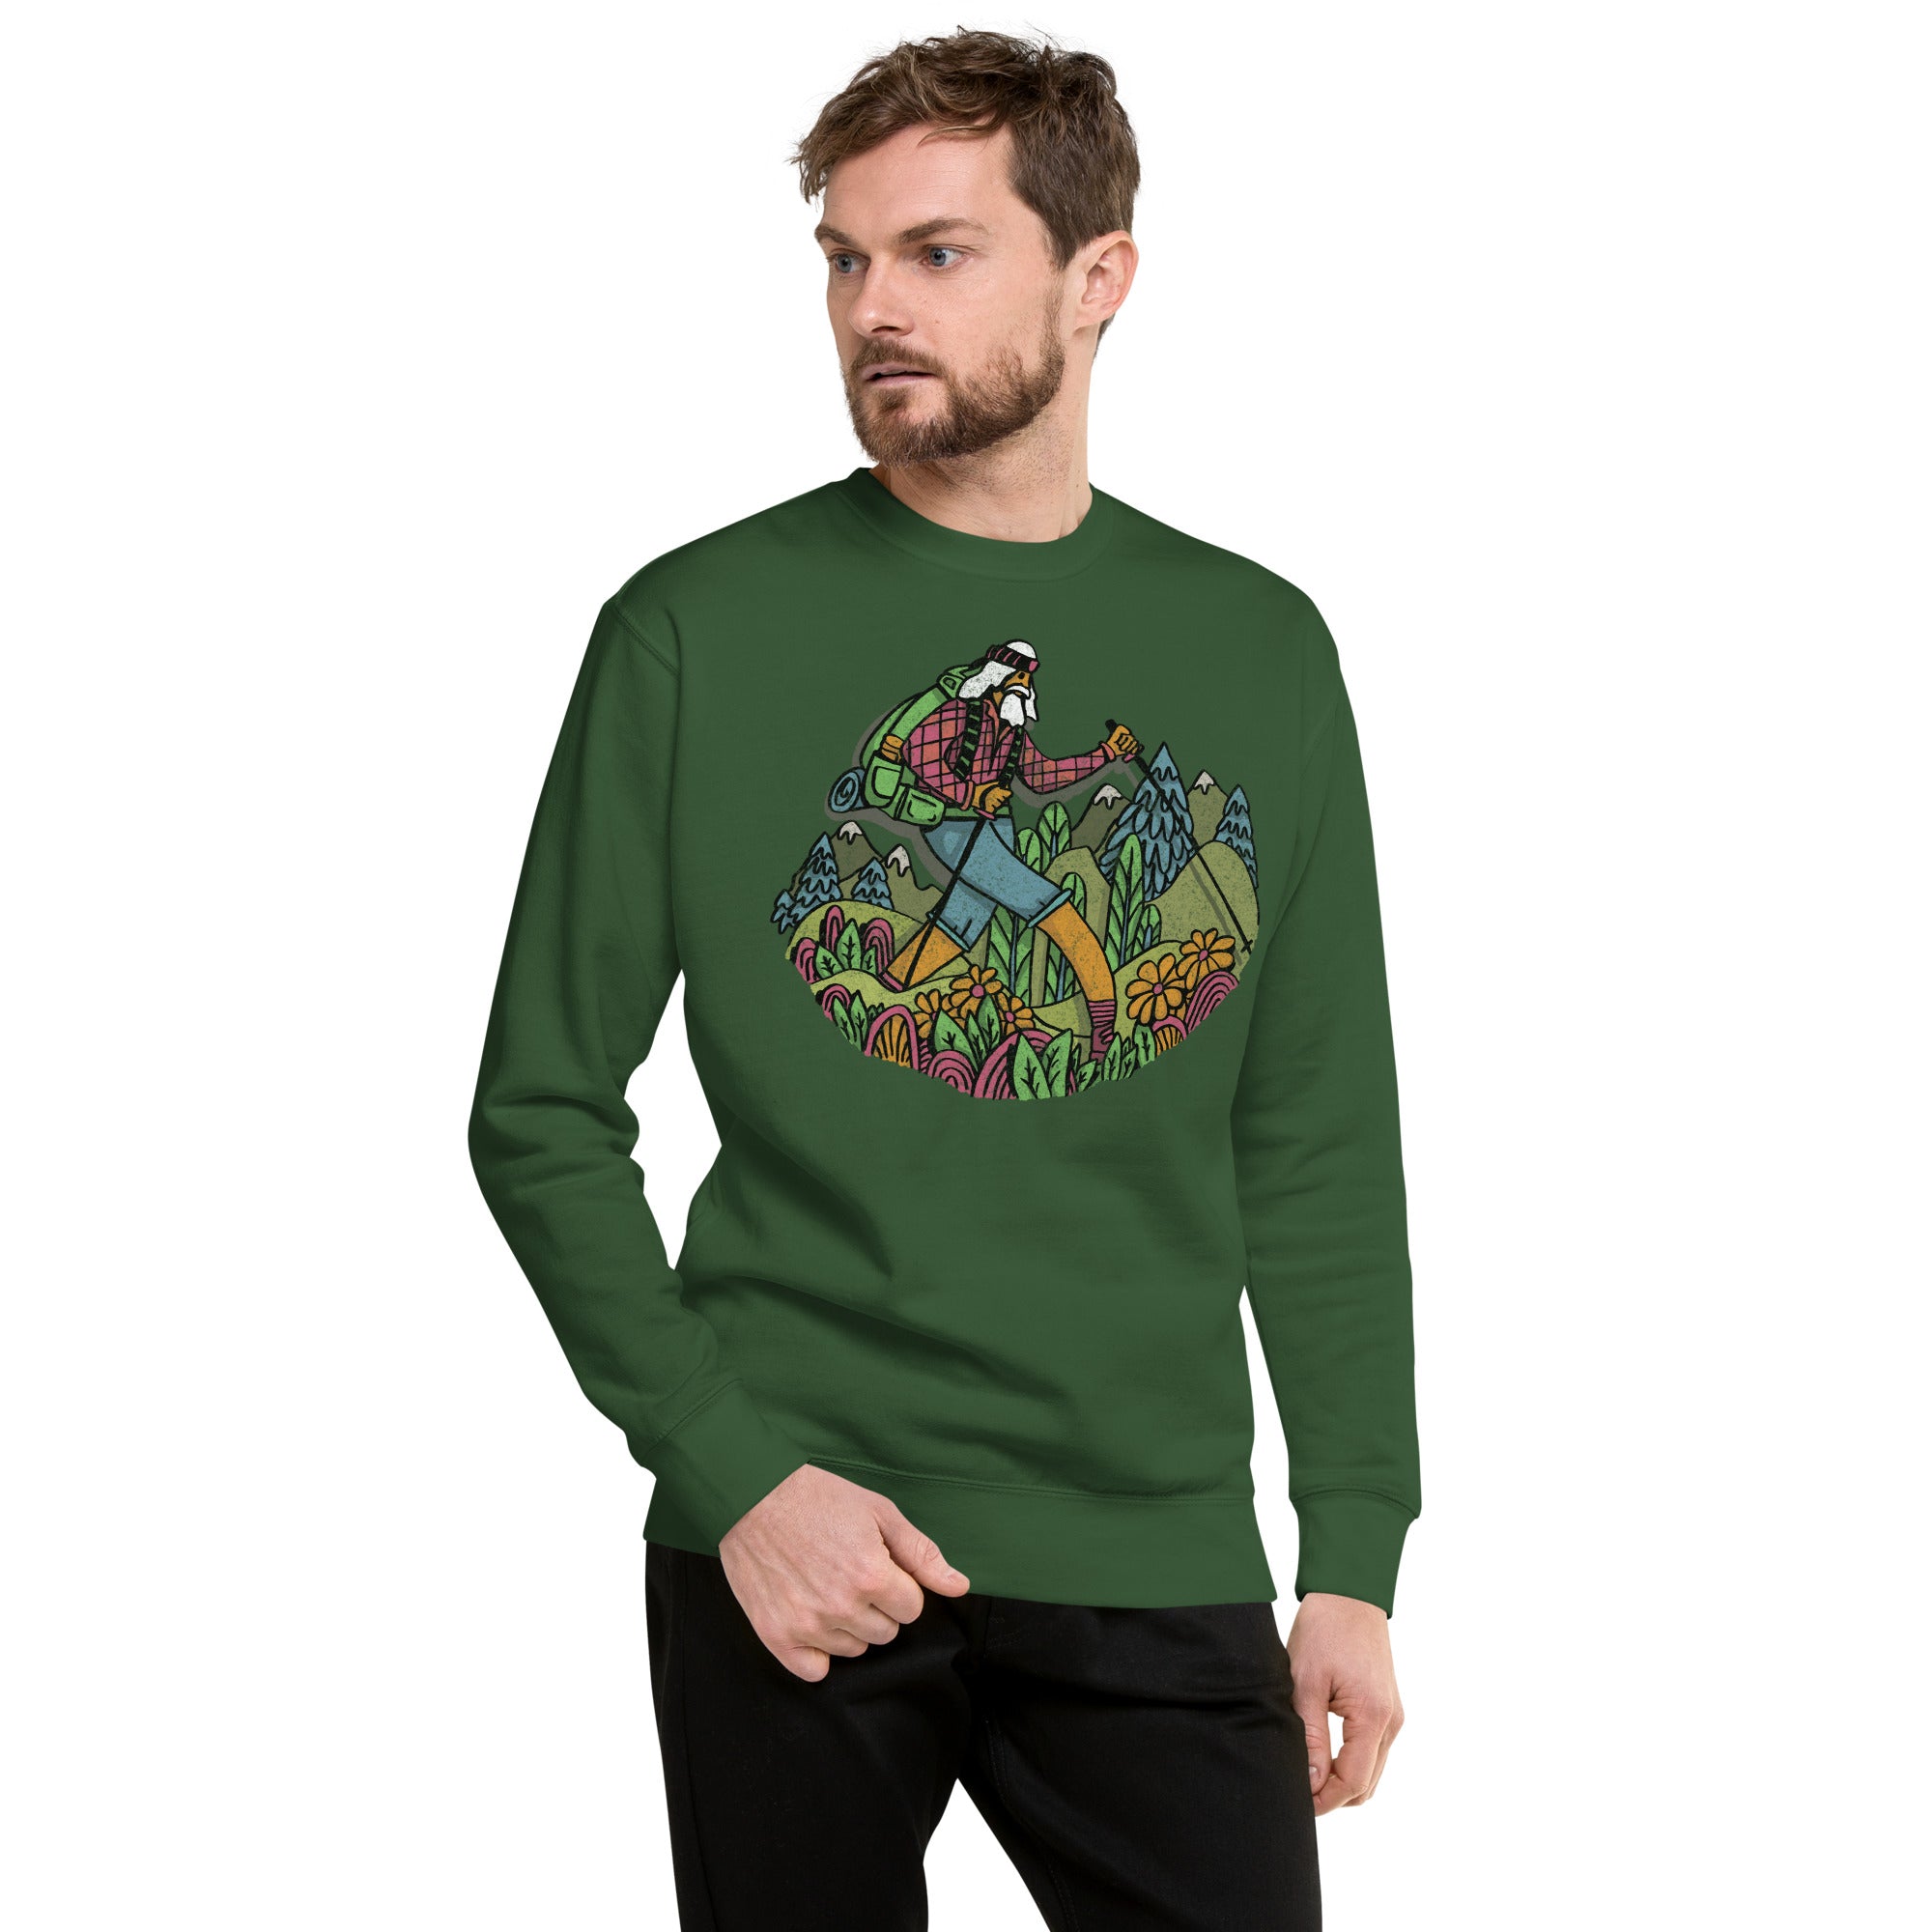 Wise Hiker | Design By Dylan Fant Cool Classic Sweatshirt | Vintage Outdoorsy Fleece on Model | Solid Threads